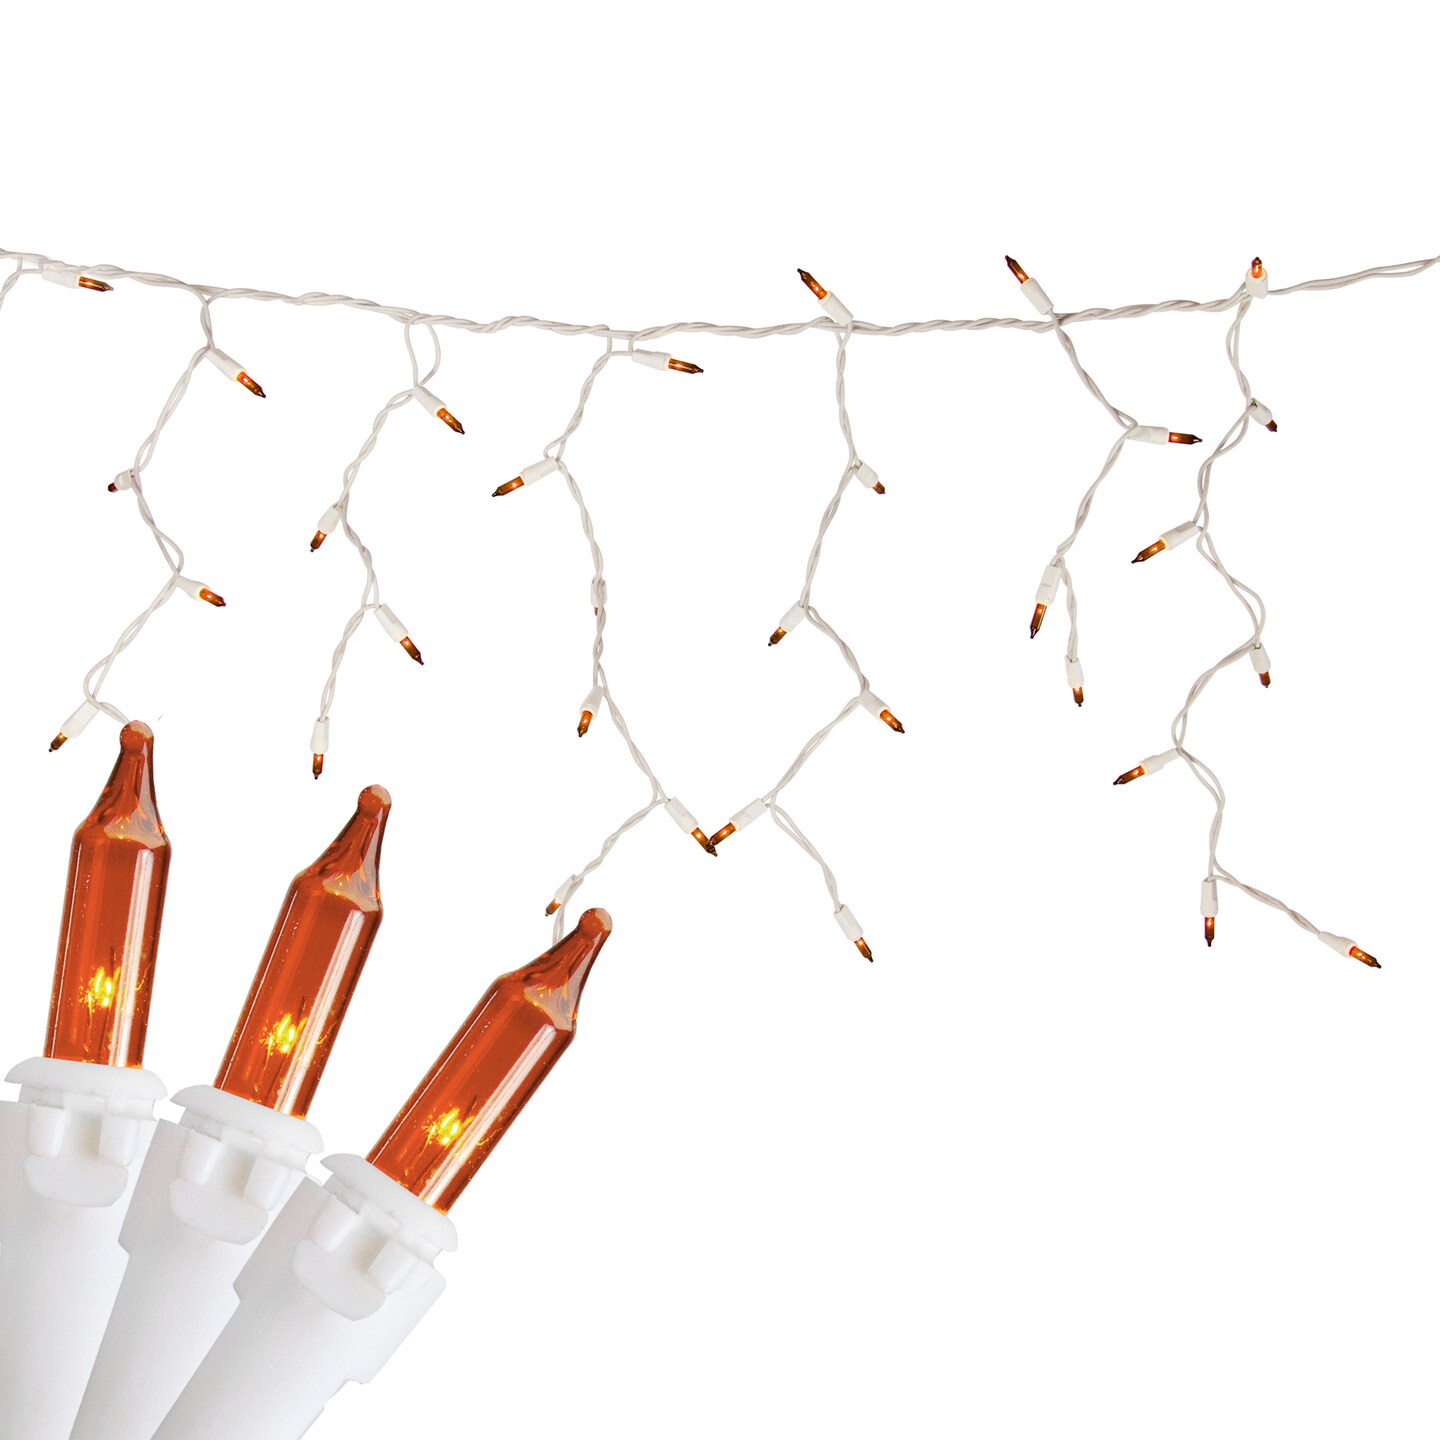 Northlight 100 Count Orange Mini Icicle Christmas Lights - 3.5 ft White Wire